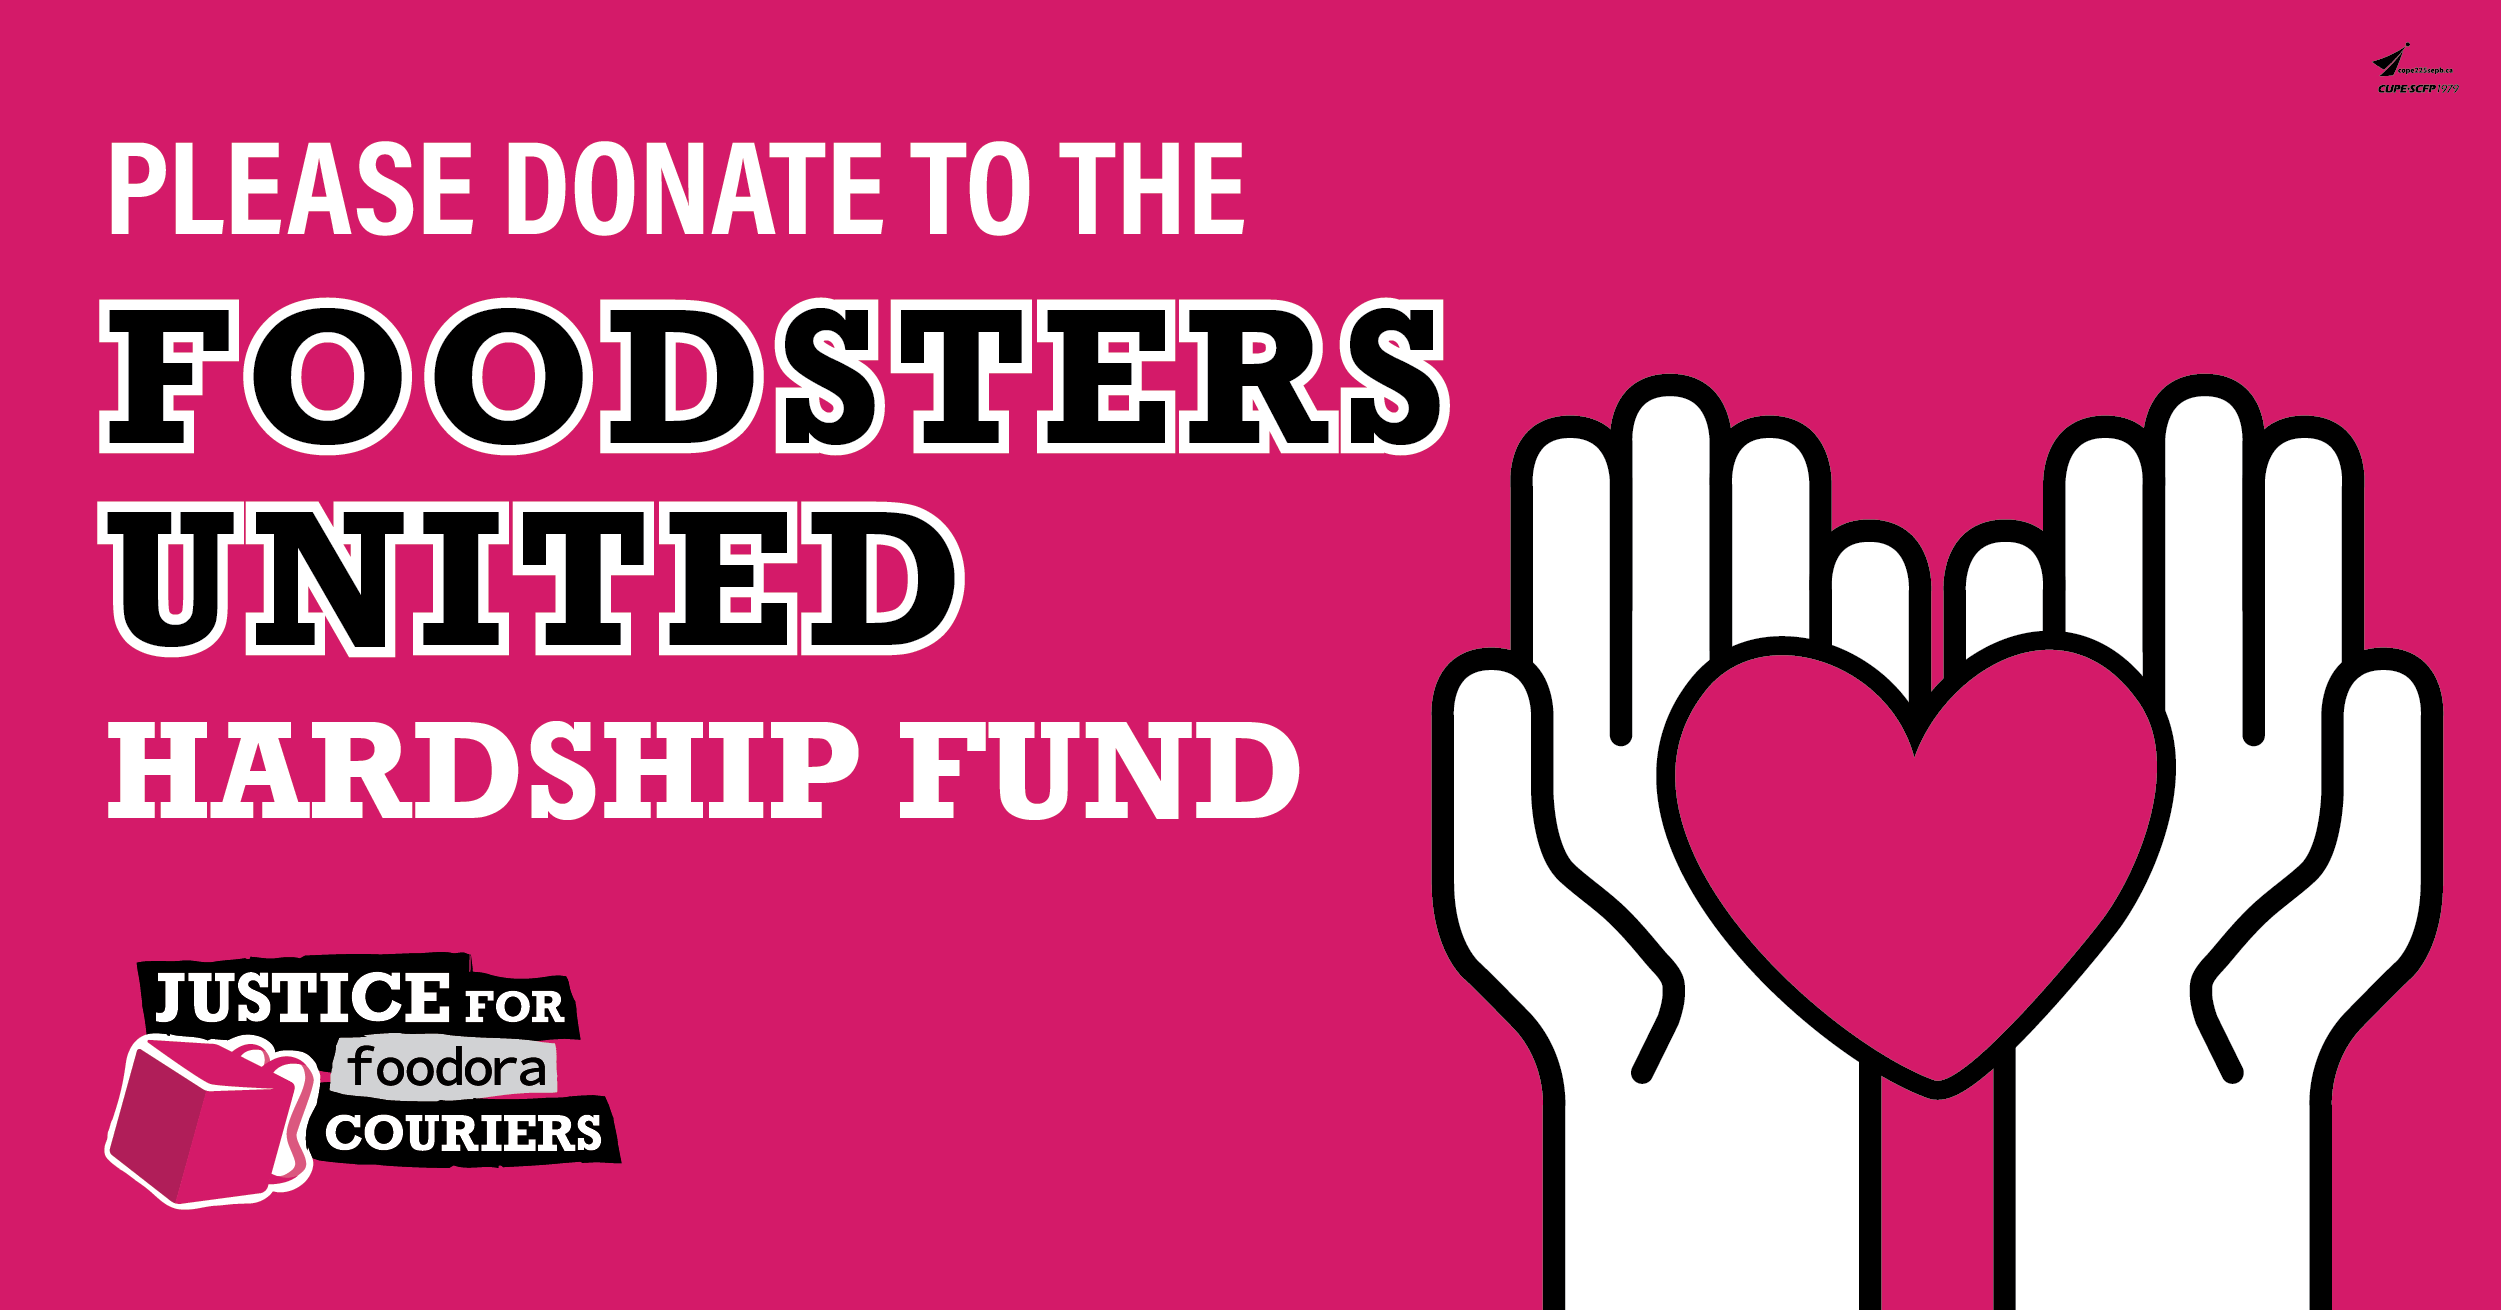 PLEASE DONATE TO THE FOODSTERS UNITED HARDSHIP FUND